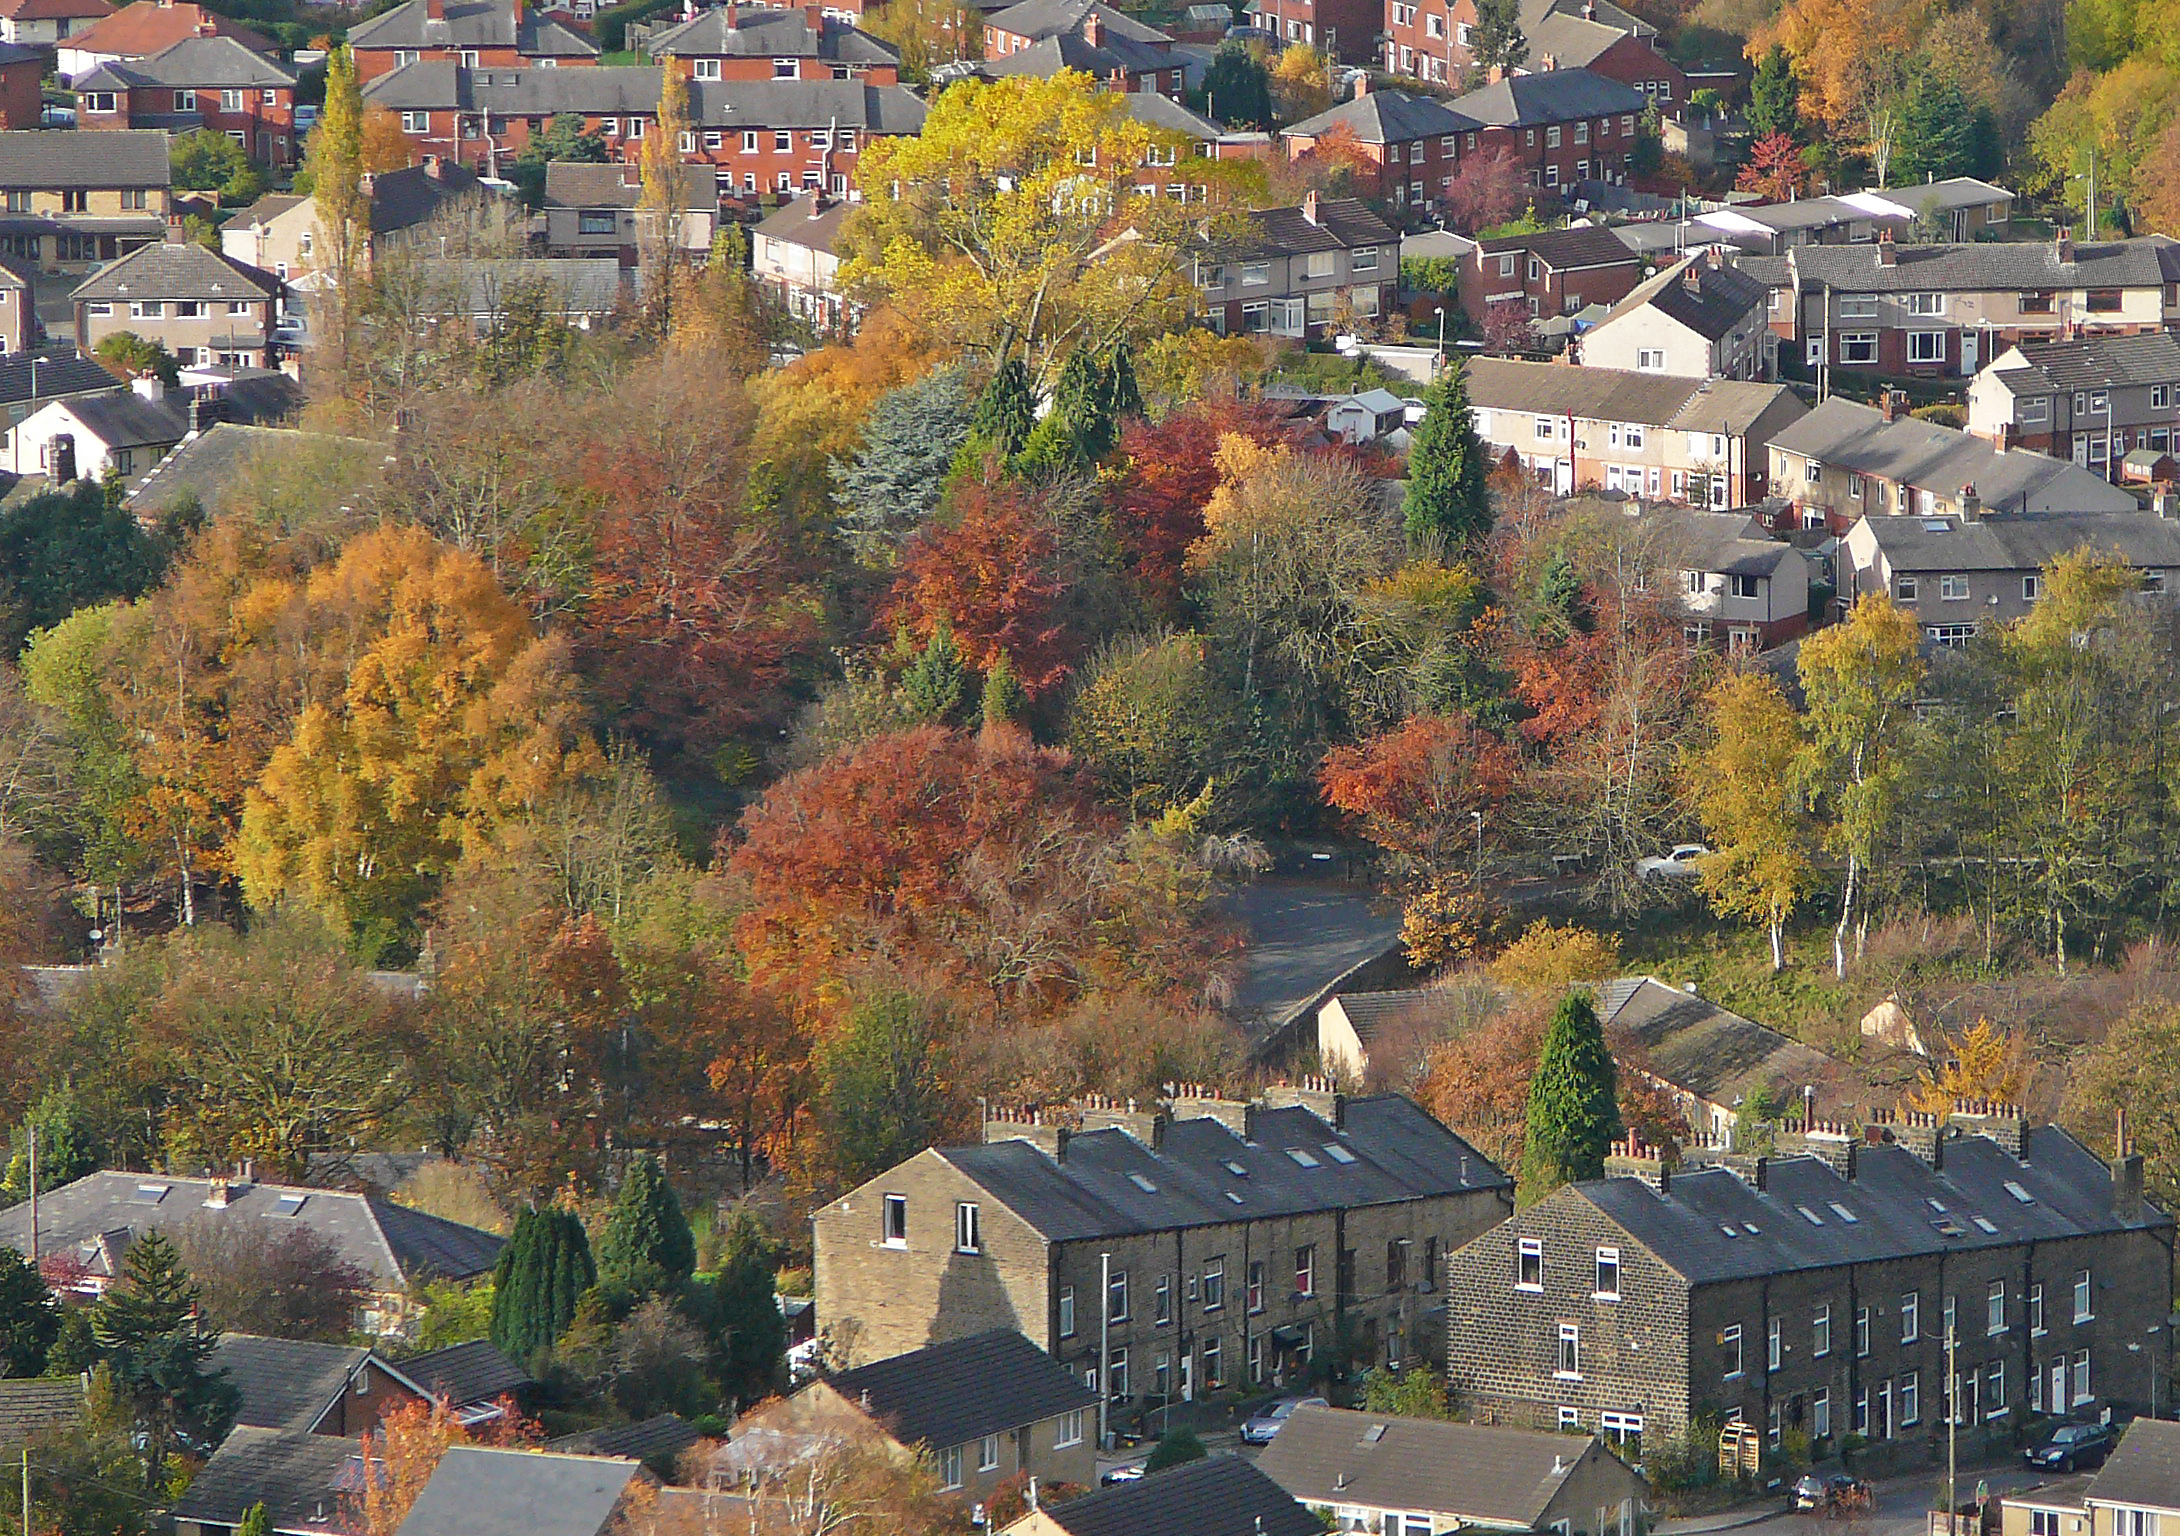 a town surrounded by many rows of houses